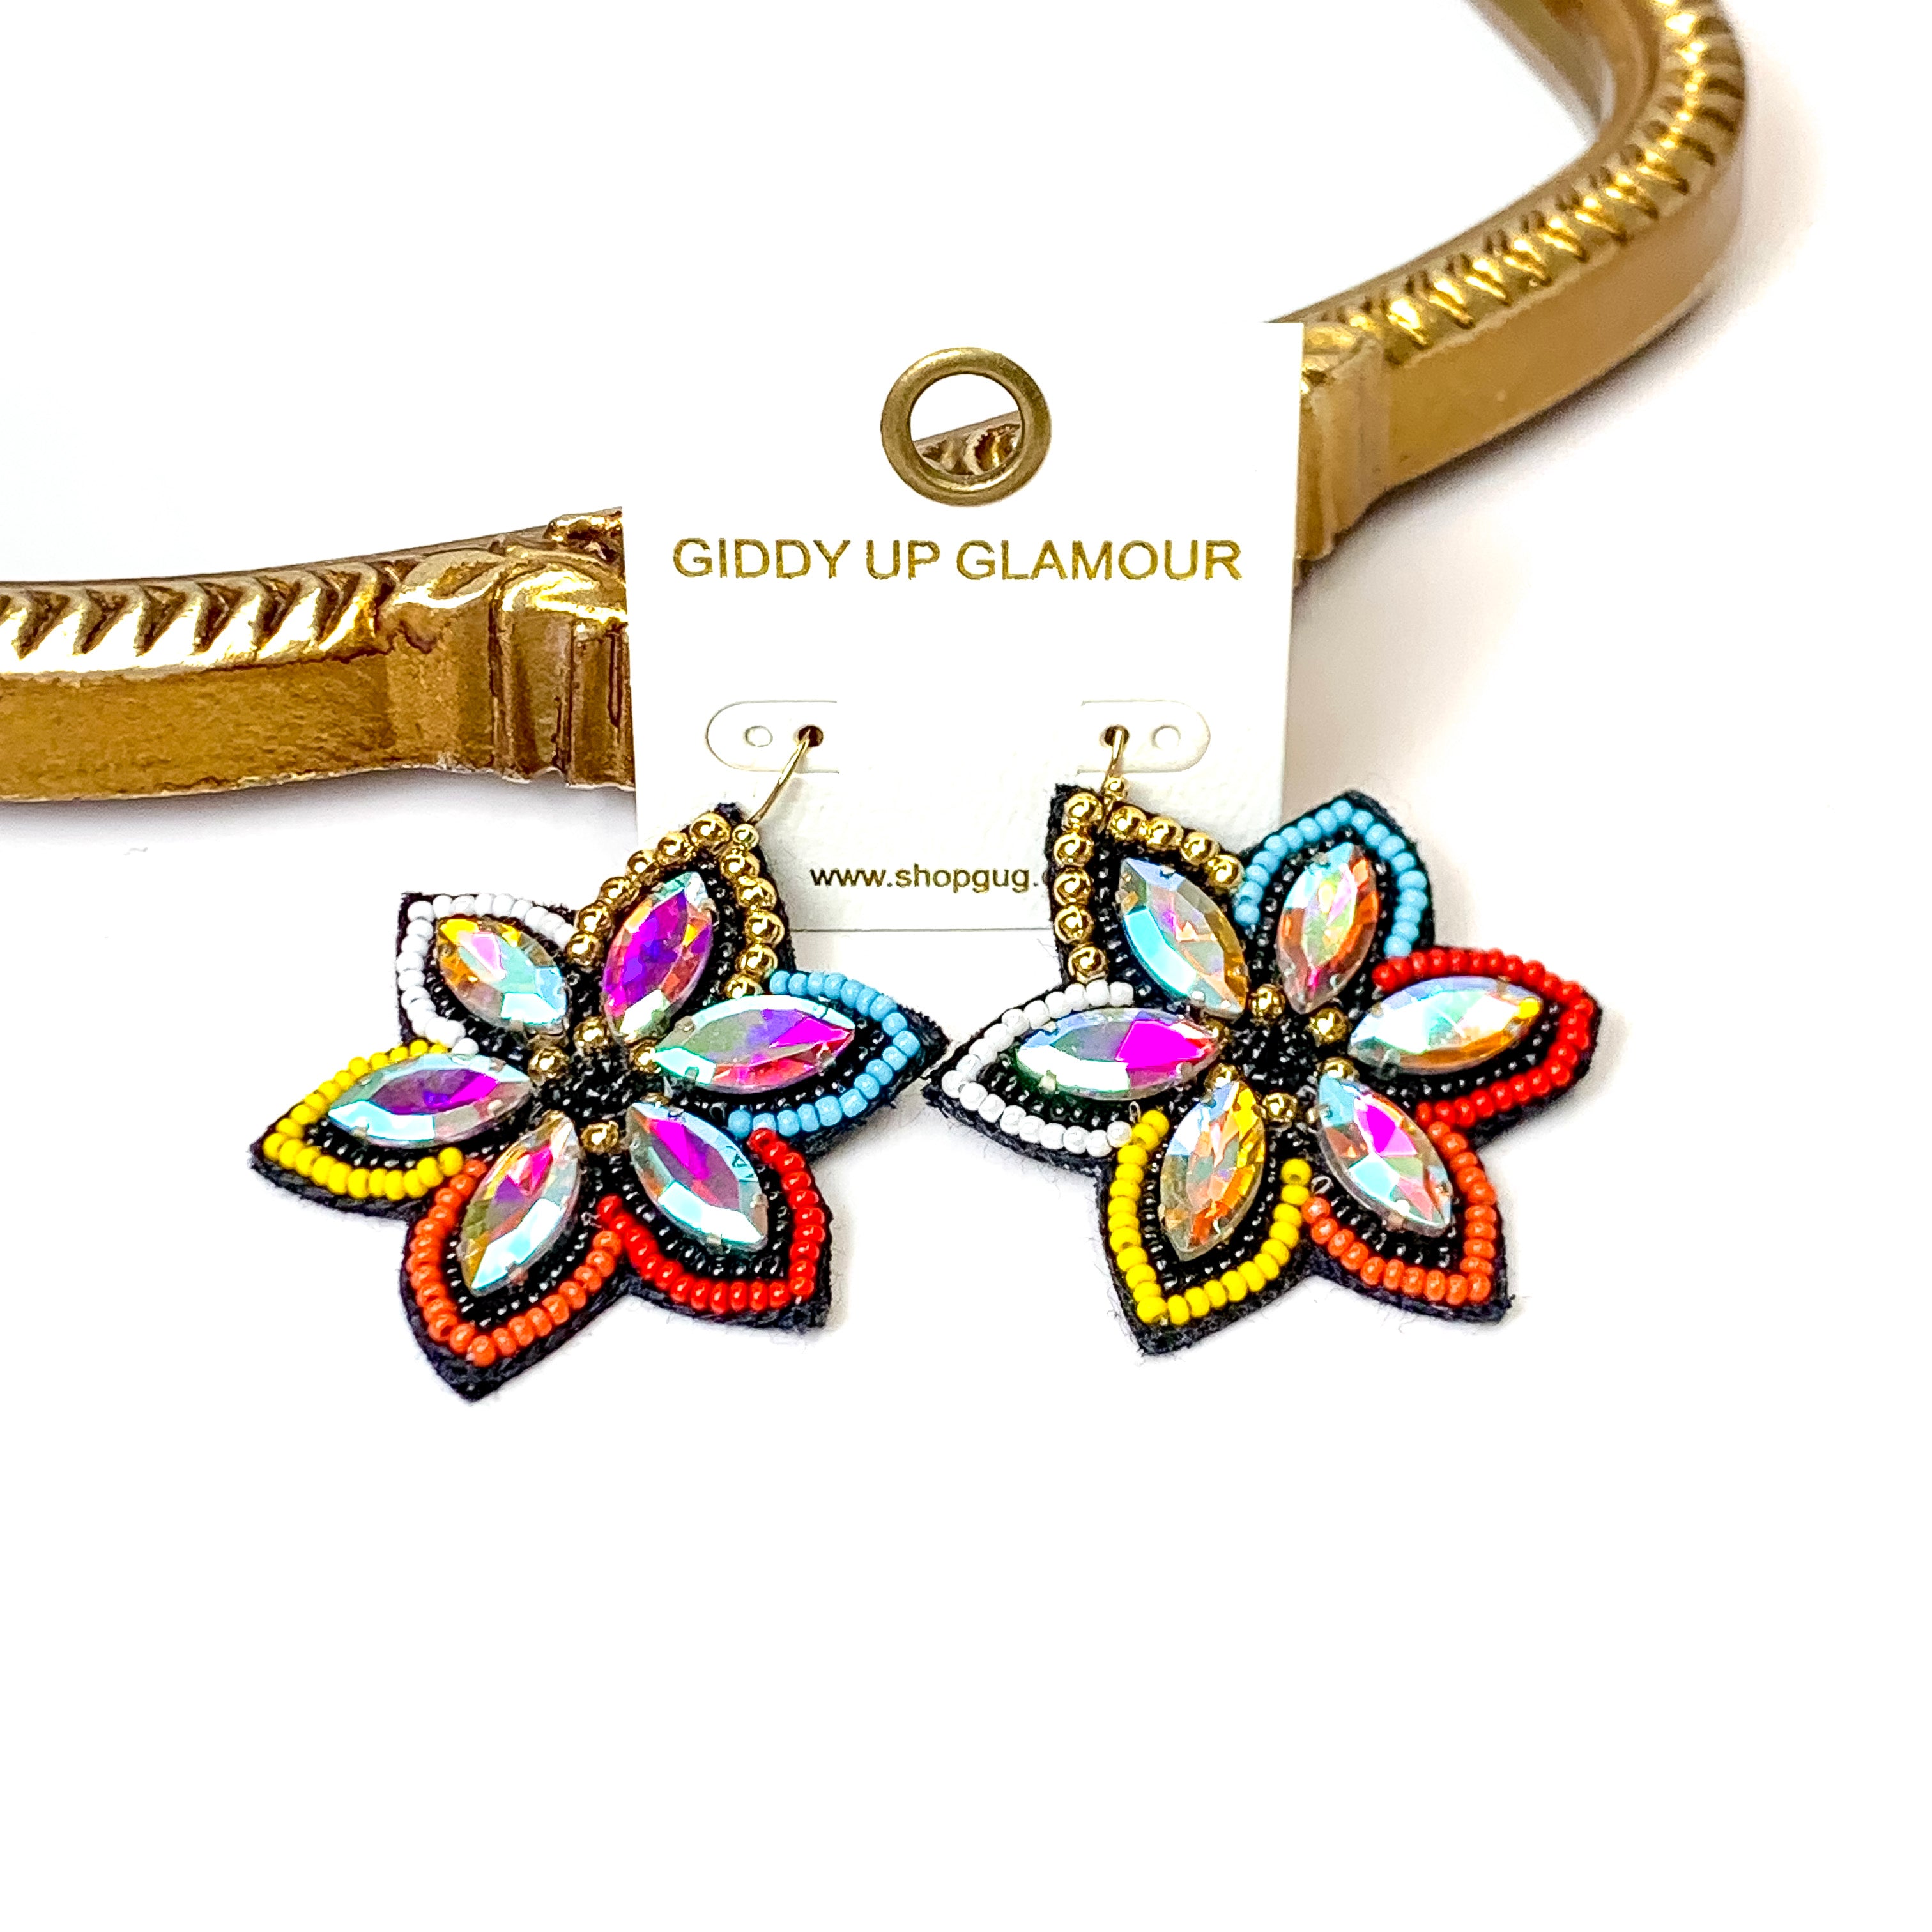 Desert Daisy Multicolored Flower Shaped Earrings with AB Crystal Accents in Black